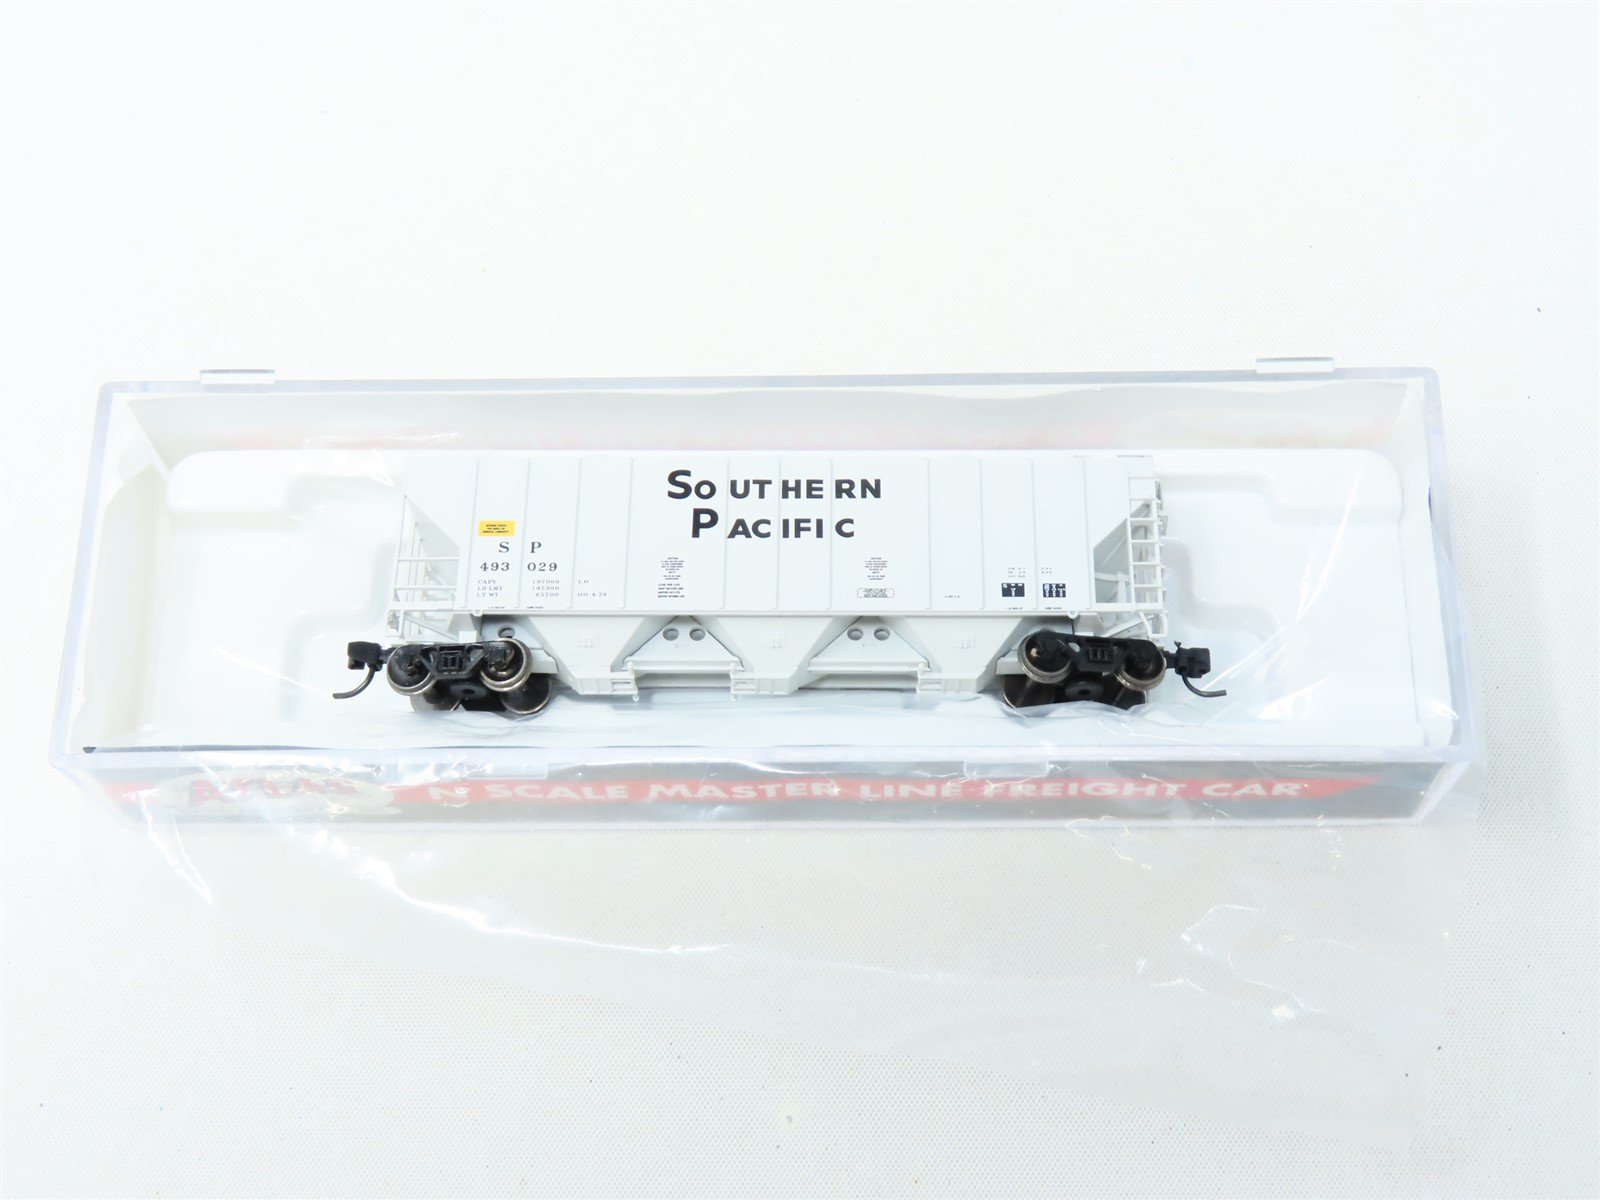 N Atlas Master Line #50003316 SP Southern Pacific 3-Bay Covered Hopper #493029